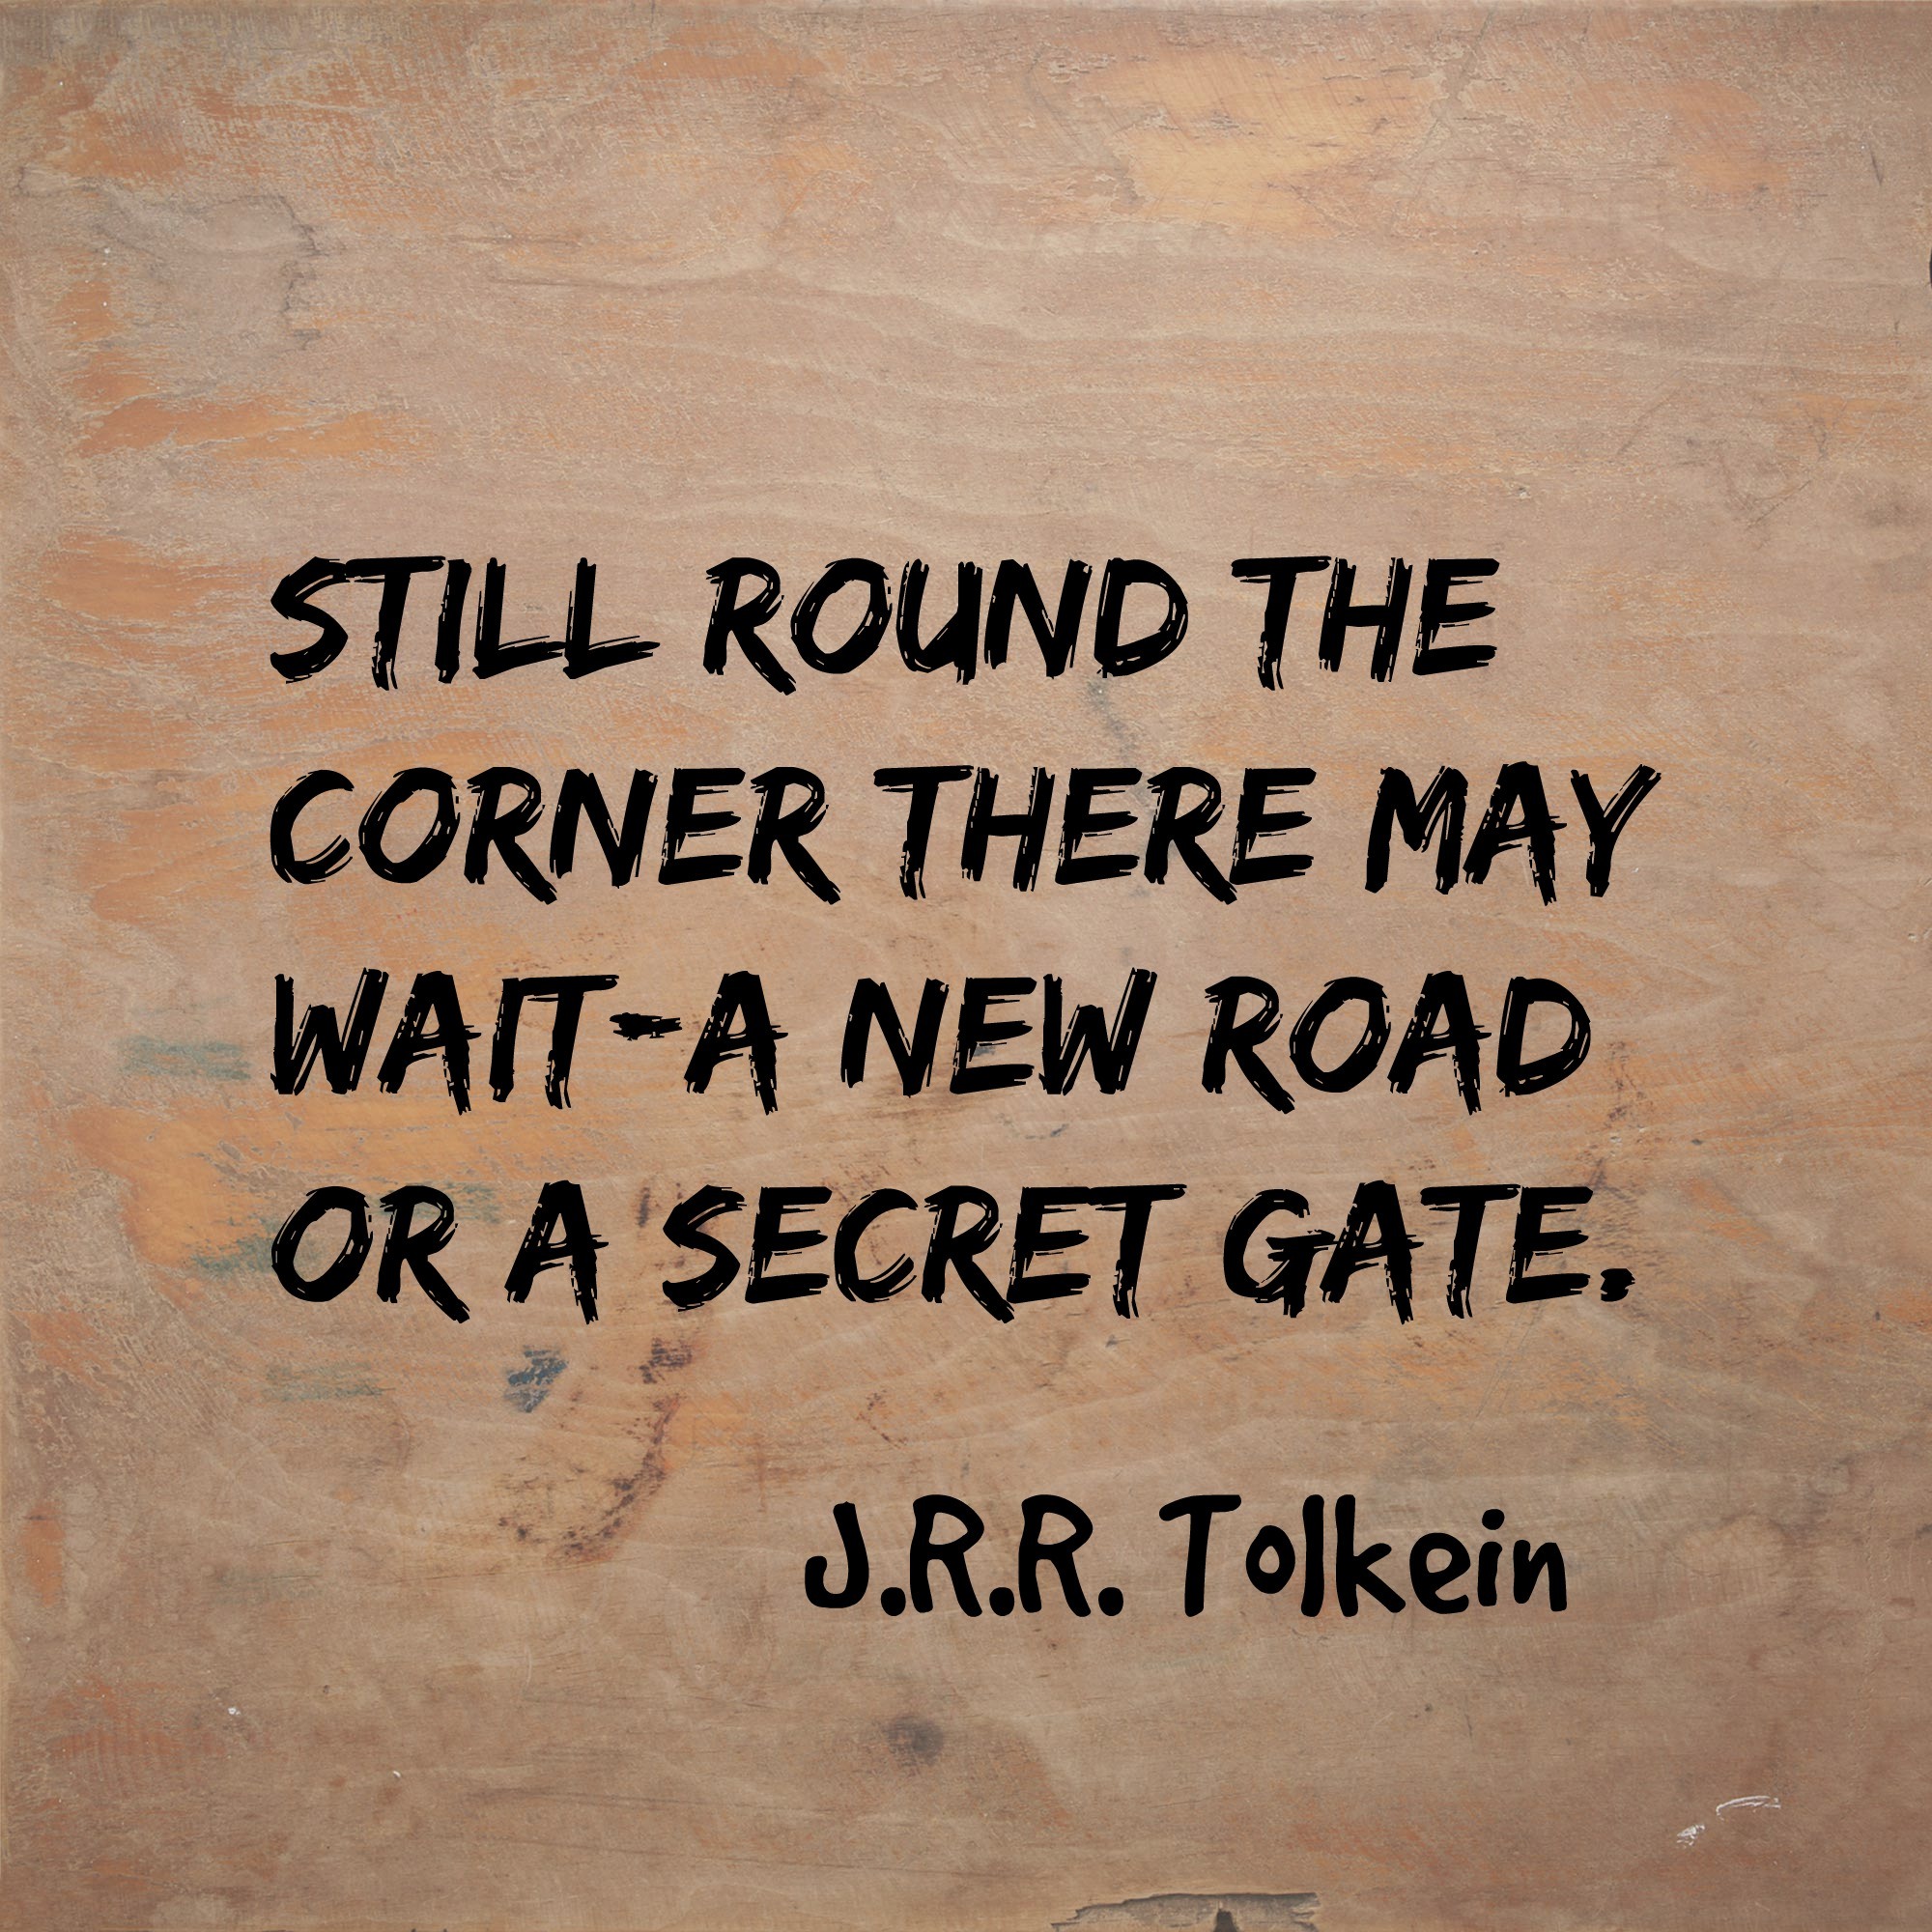 Still round the corner there may wait, a new road or secret gate.